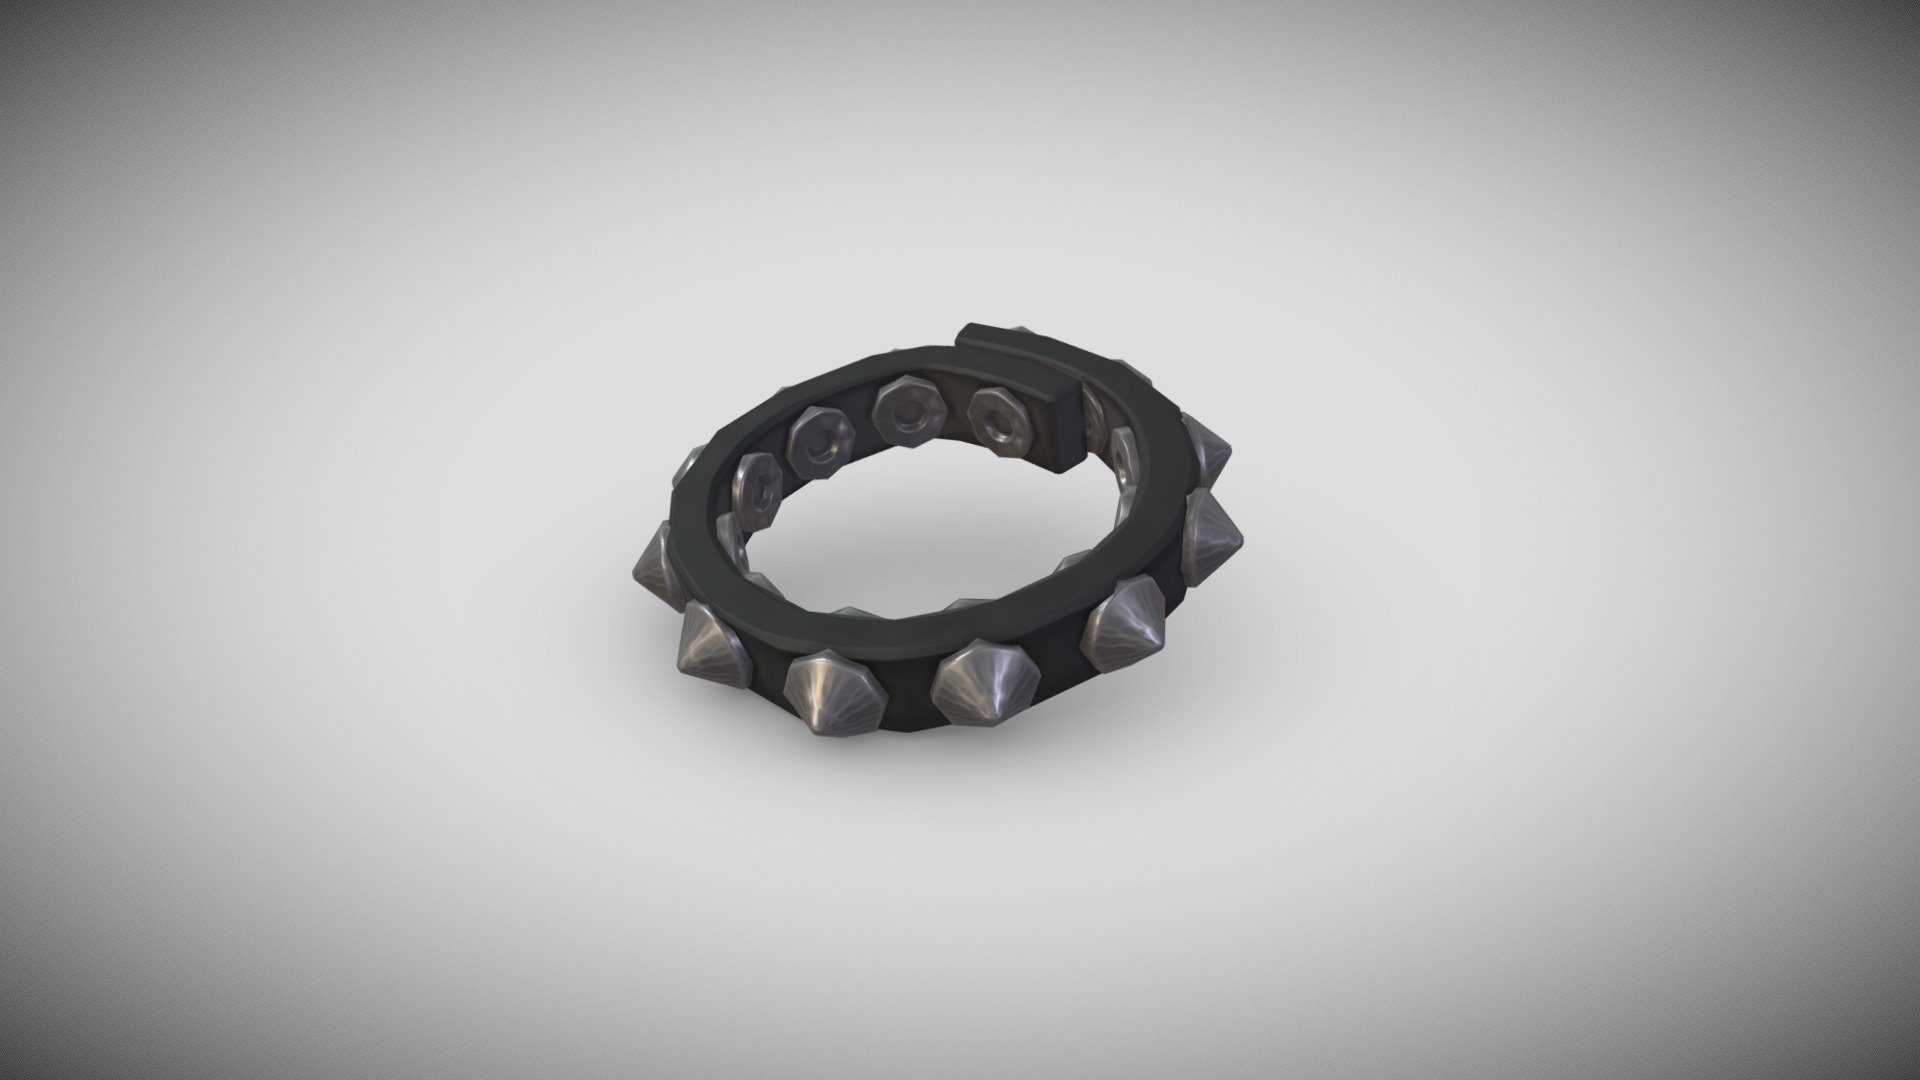 If you need additional work done do not hesitate to contact me, I am available for freelance work.

Slimmest Variation of punk bracelet for the wrist / arm with round spikey stud type. Can also be used as choker or belt or other types of accessory for a punk character or to leash a pet dog/cat/etc. to look more badass/goth/emo/etc. Full retopology and pbr colored.

Punk Rock Biker Slimmest Strap Leather Bracelet Leather, 1 row of Rivets, Buckle Cuff Bracelet. Spike Studs. Studded Wristband. Clasp Bracelet. Heavy Metal Rock.

Highpoly sculpted in Nomadsculpt. Lowpoly made in Blender. Model and Concept by Me, Enya Gerber 3d model